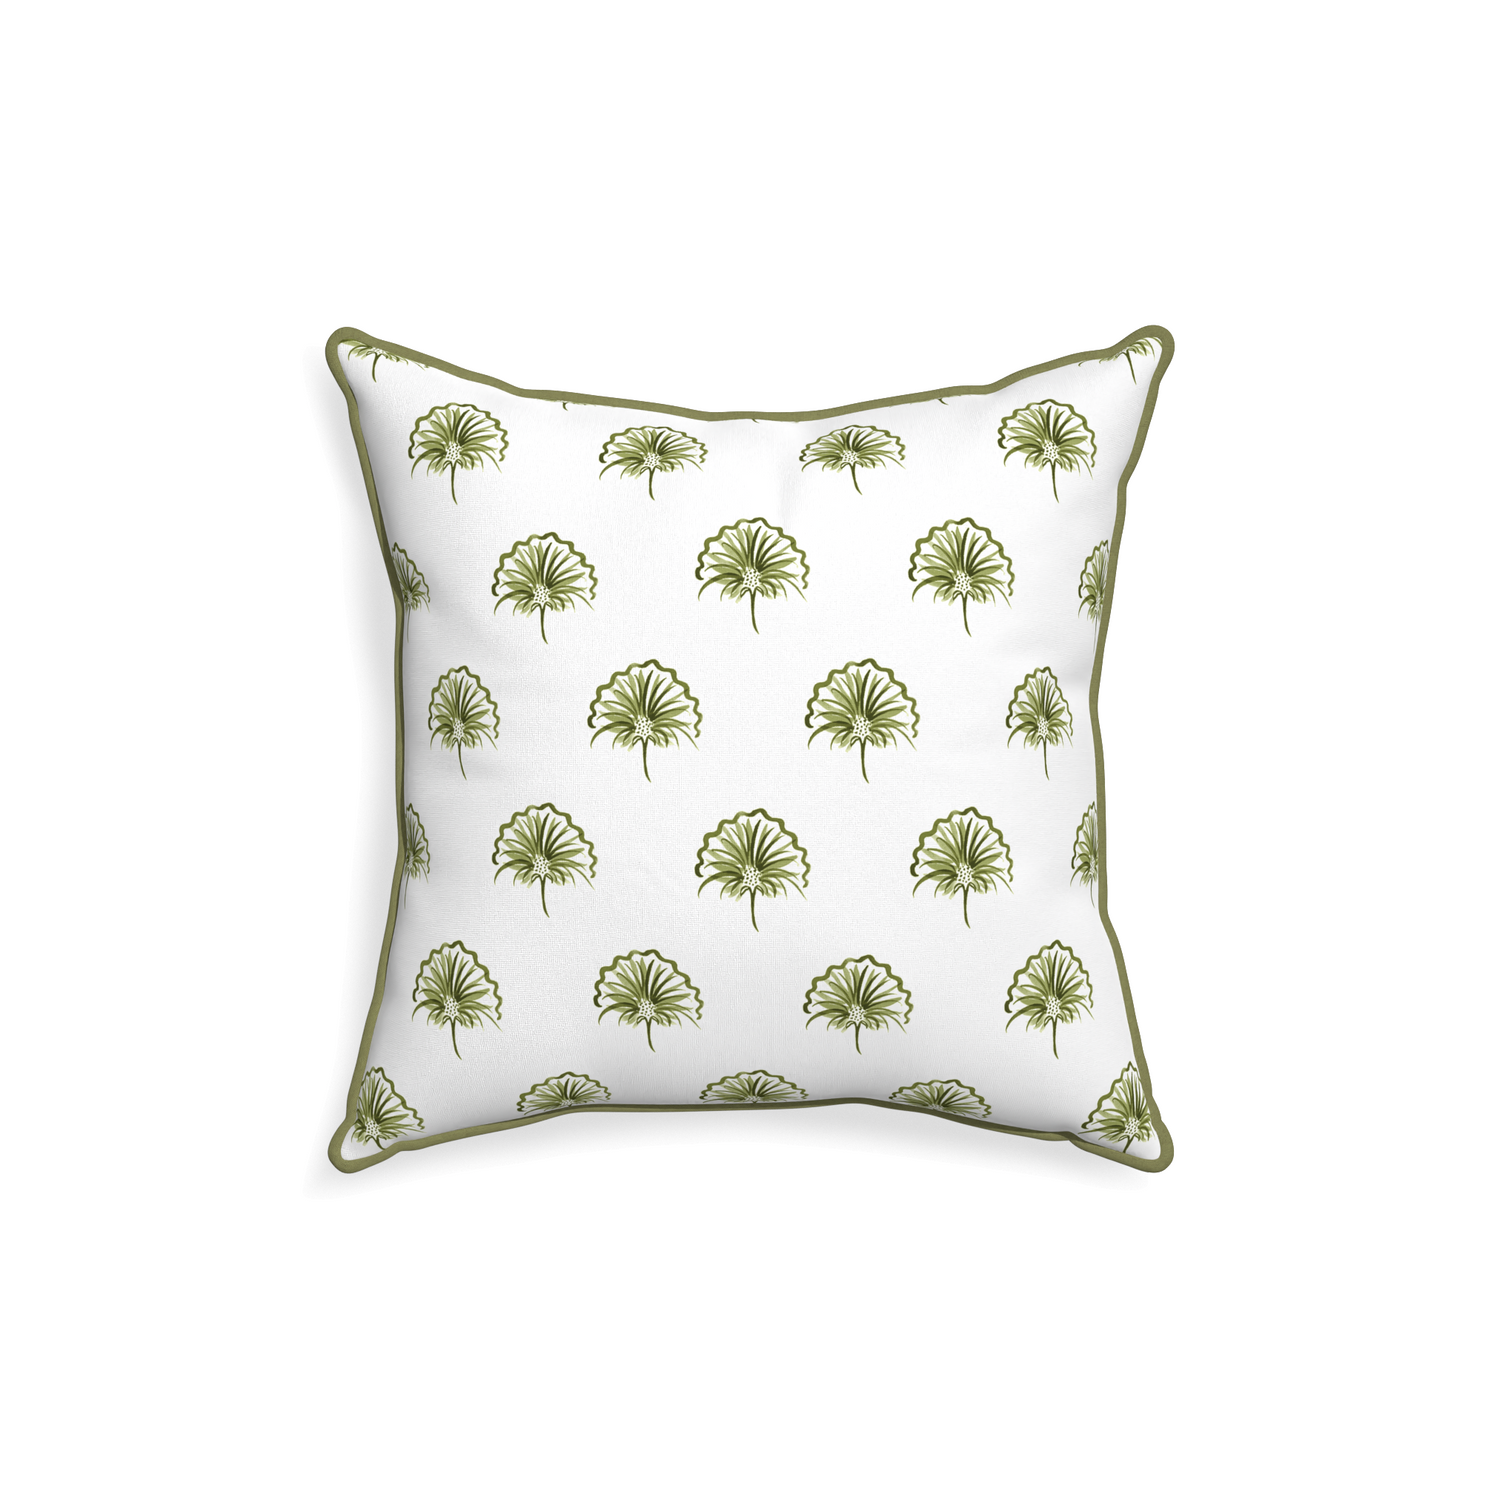 18-square penelope moss custom pillow with moss piping on white background